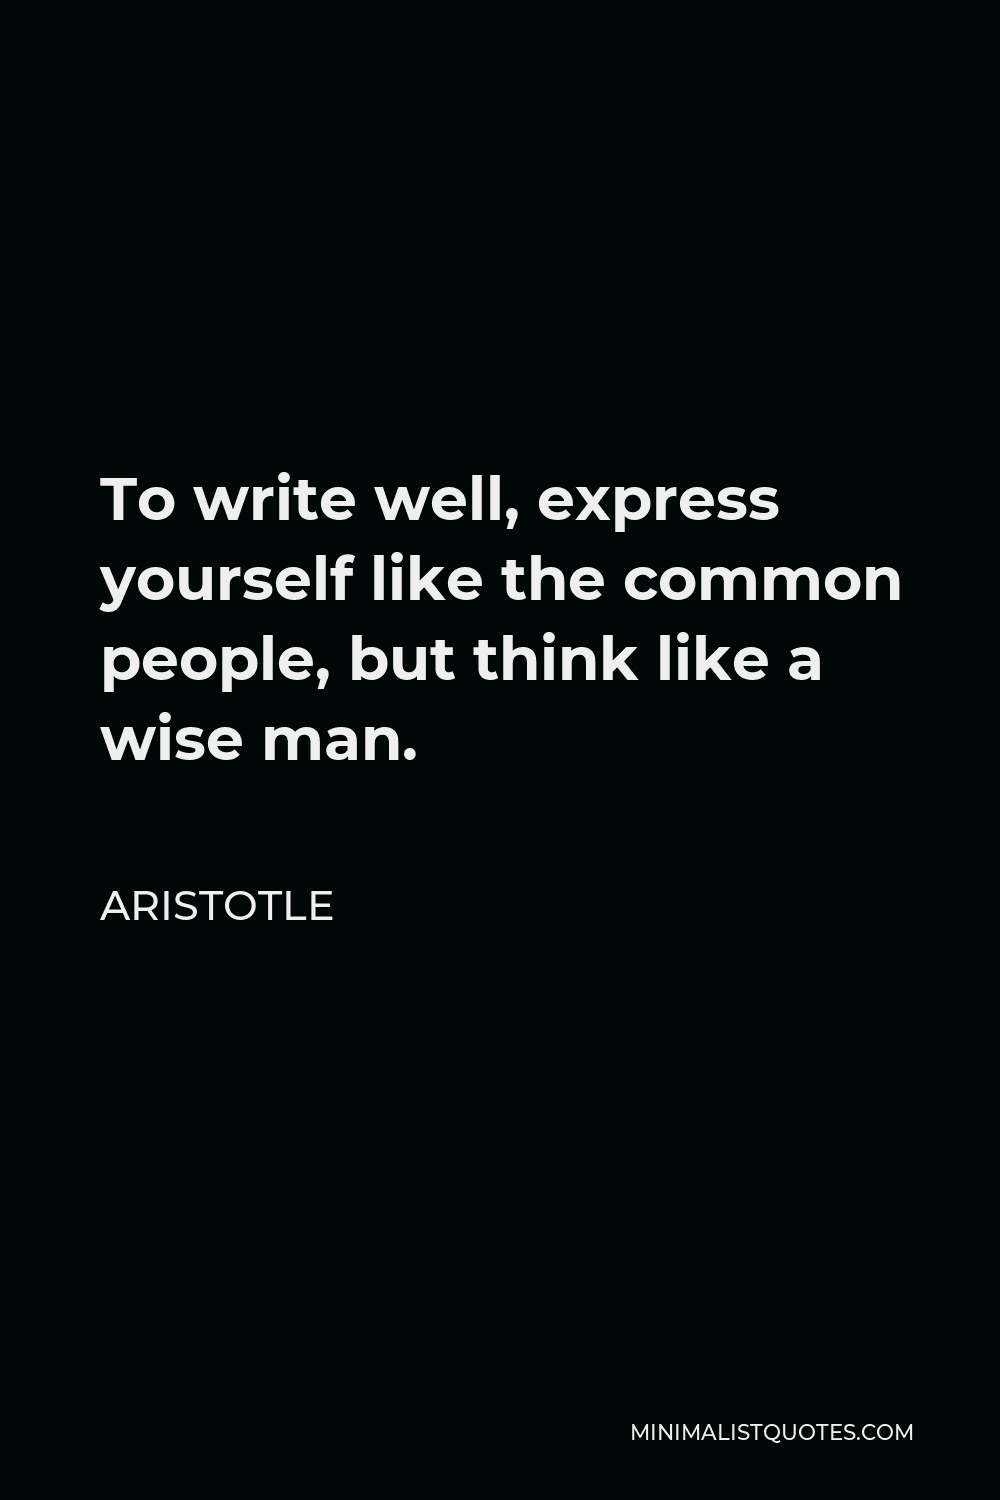 Aristotle Quote - To write well, express yourself like the common people, but think like a wise man.